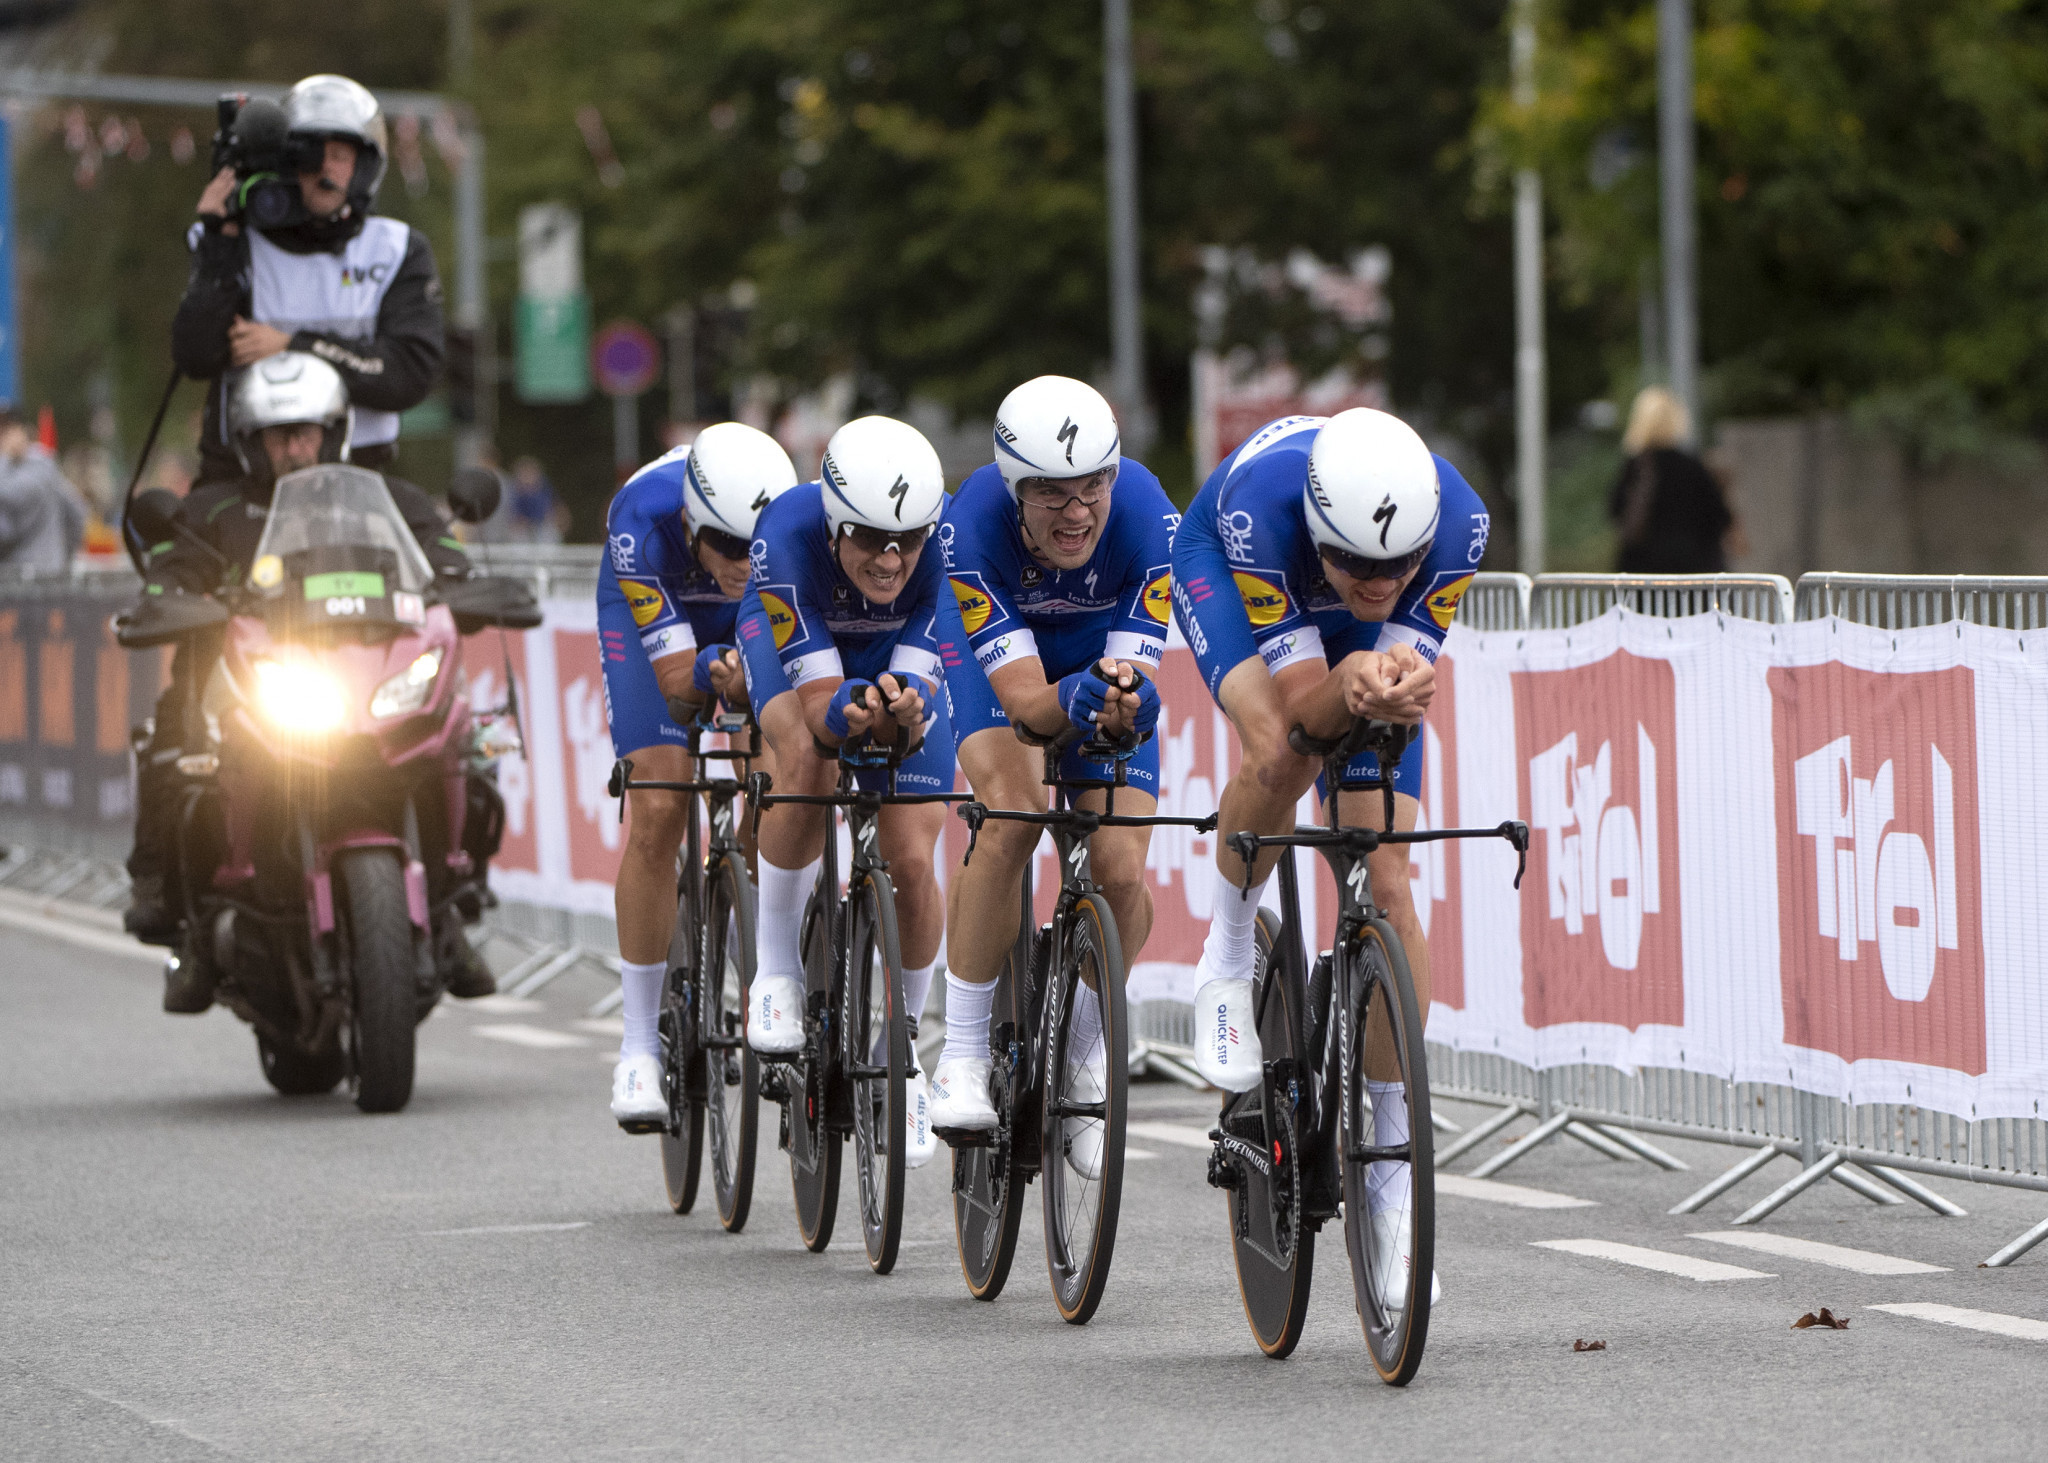 Quick-Step Floors triumphed in the men's team time trial event ©Getty Images